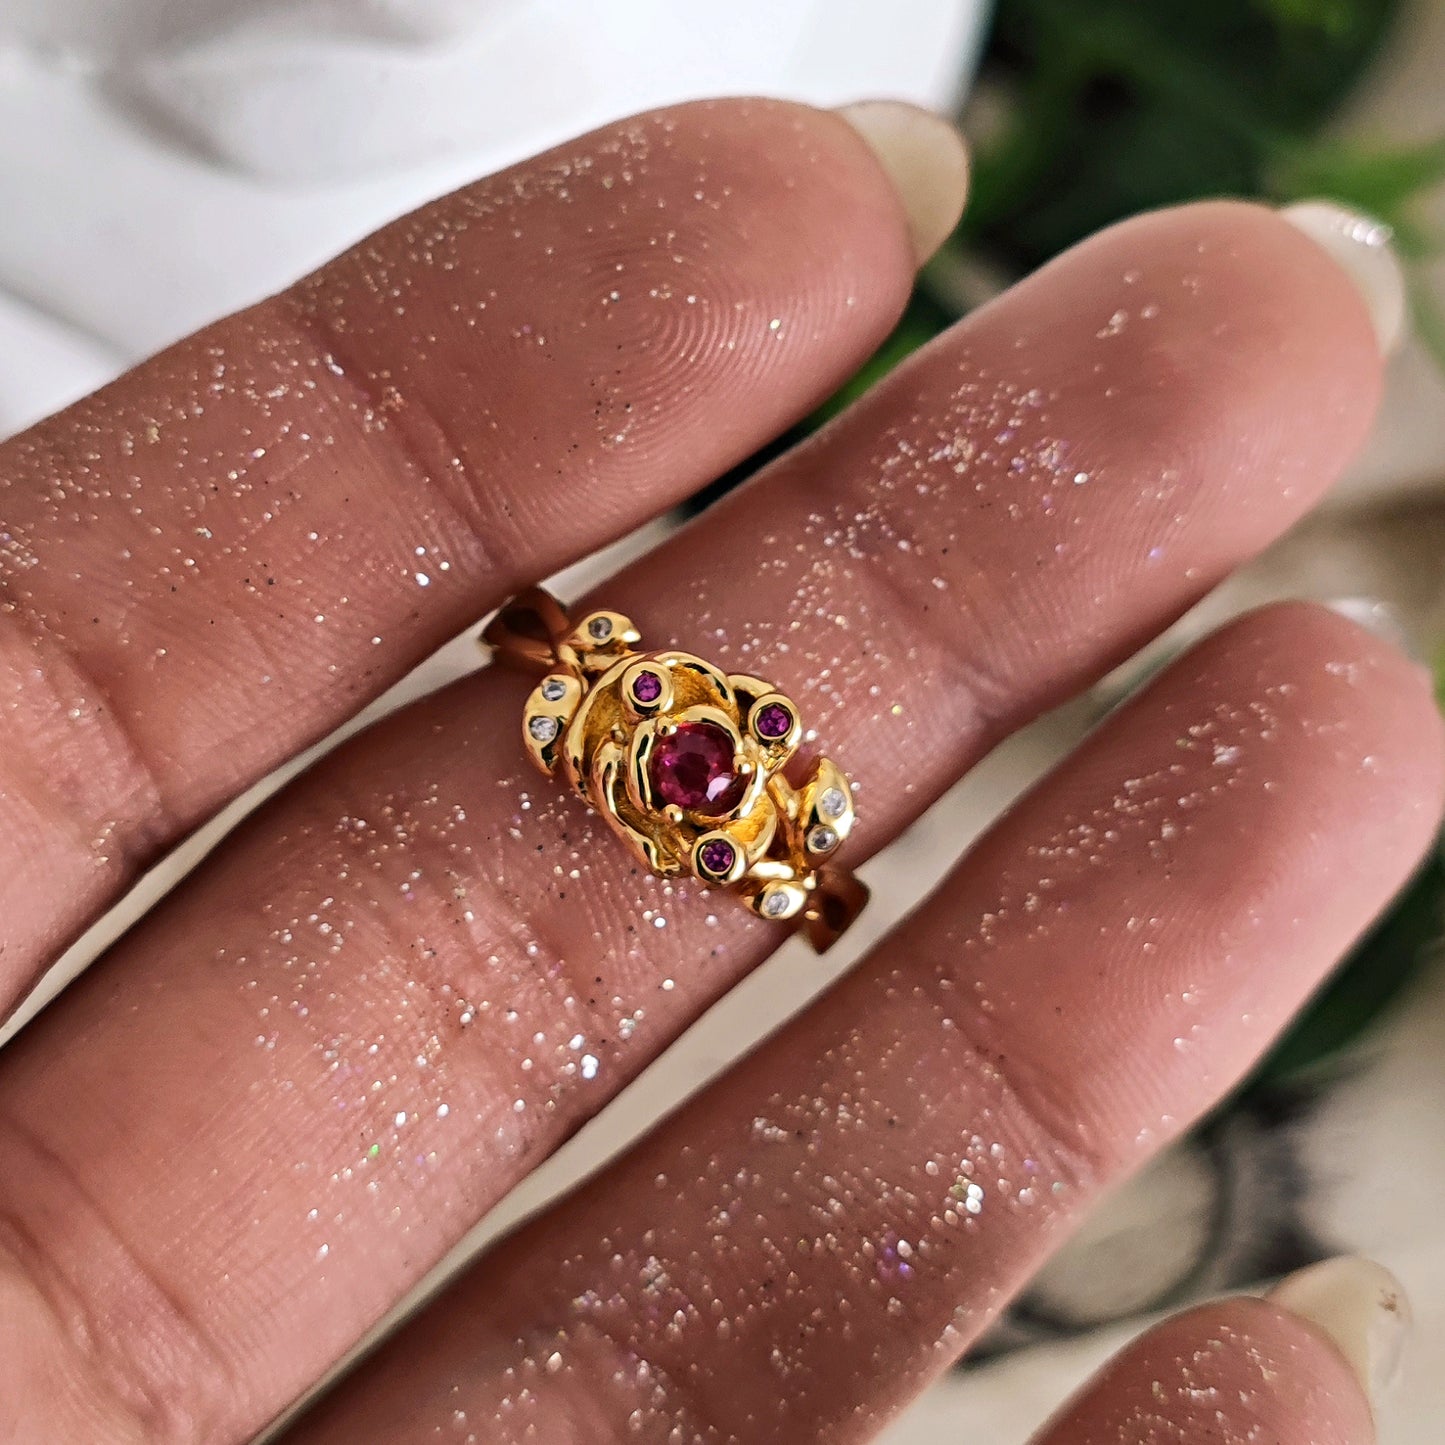 Adjustable Ring "Aphrodite" in gold plated brass and fuchsia cubic zirconia